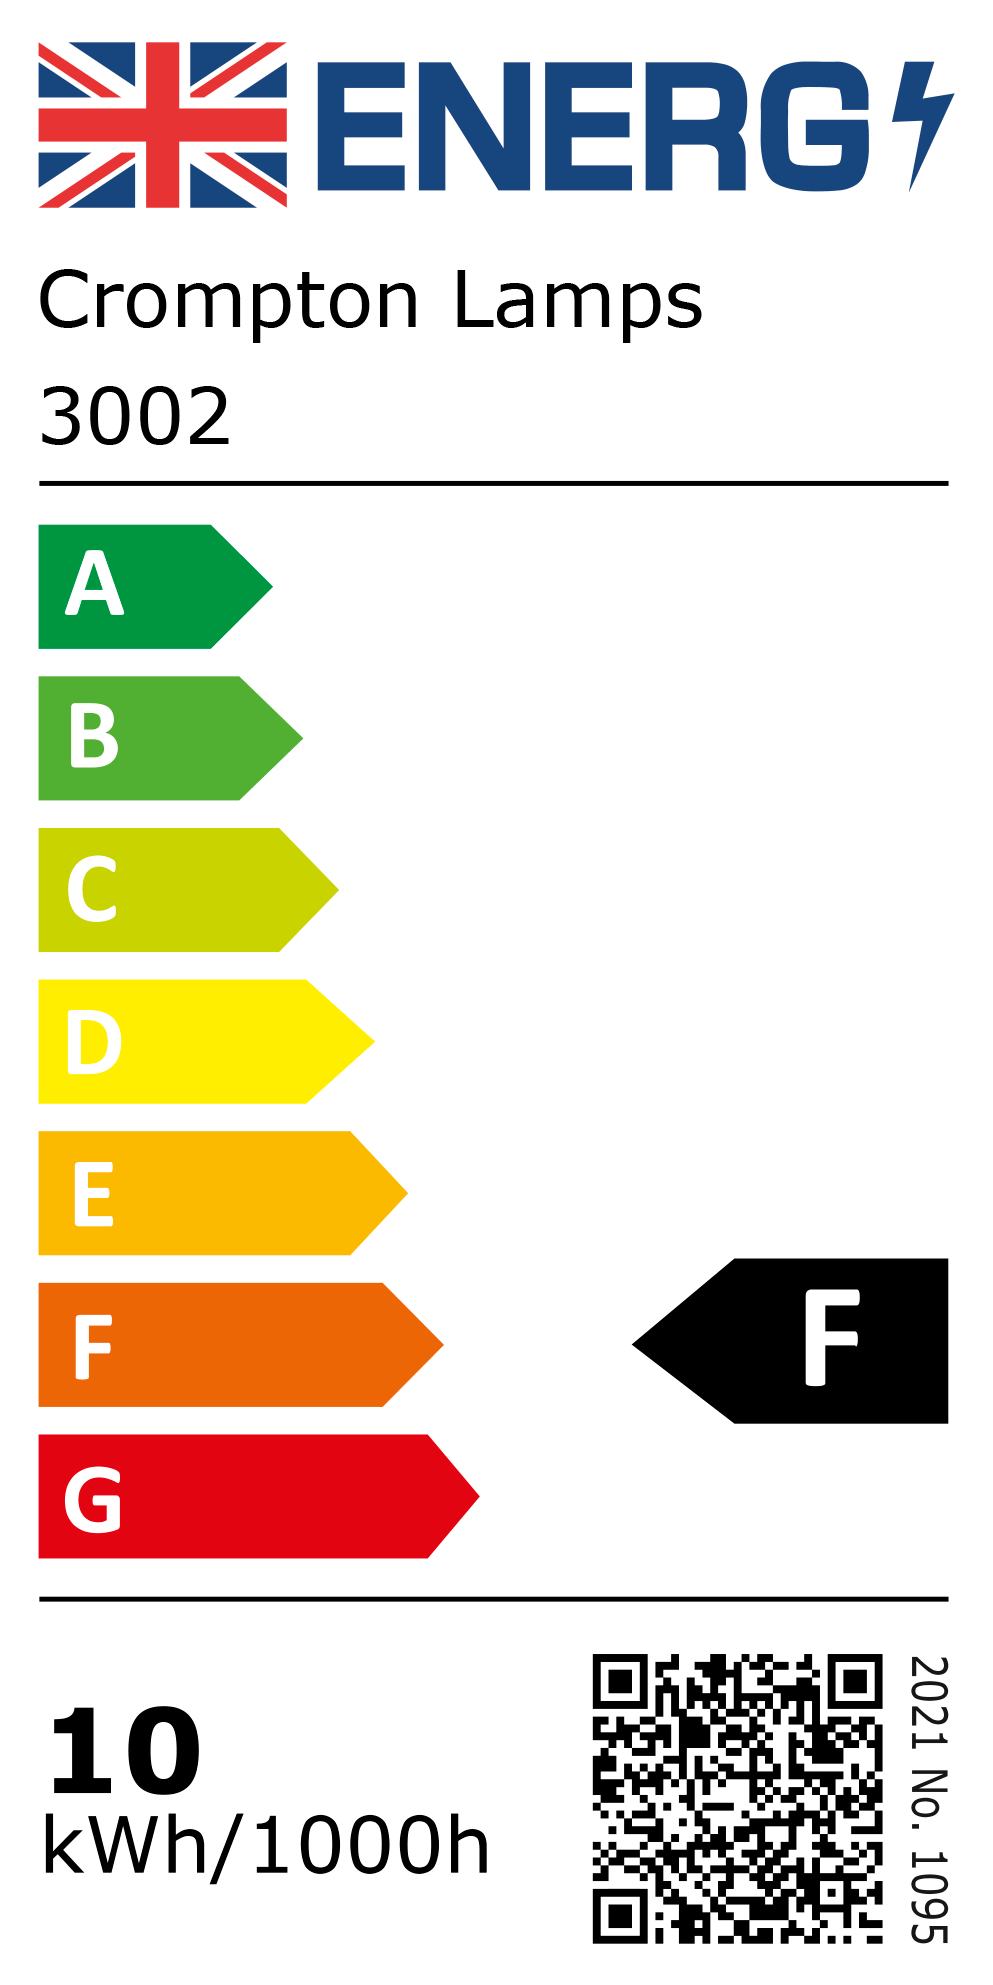 New 2021 Energy Rating Label: Stock Code 3002